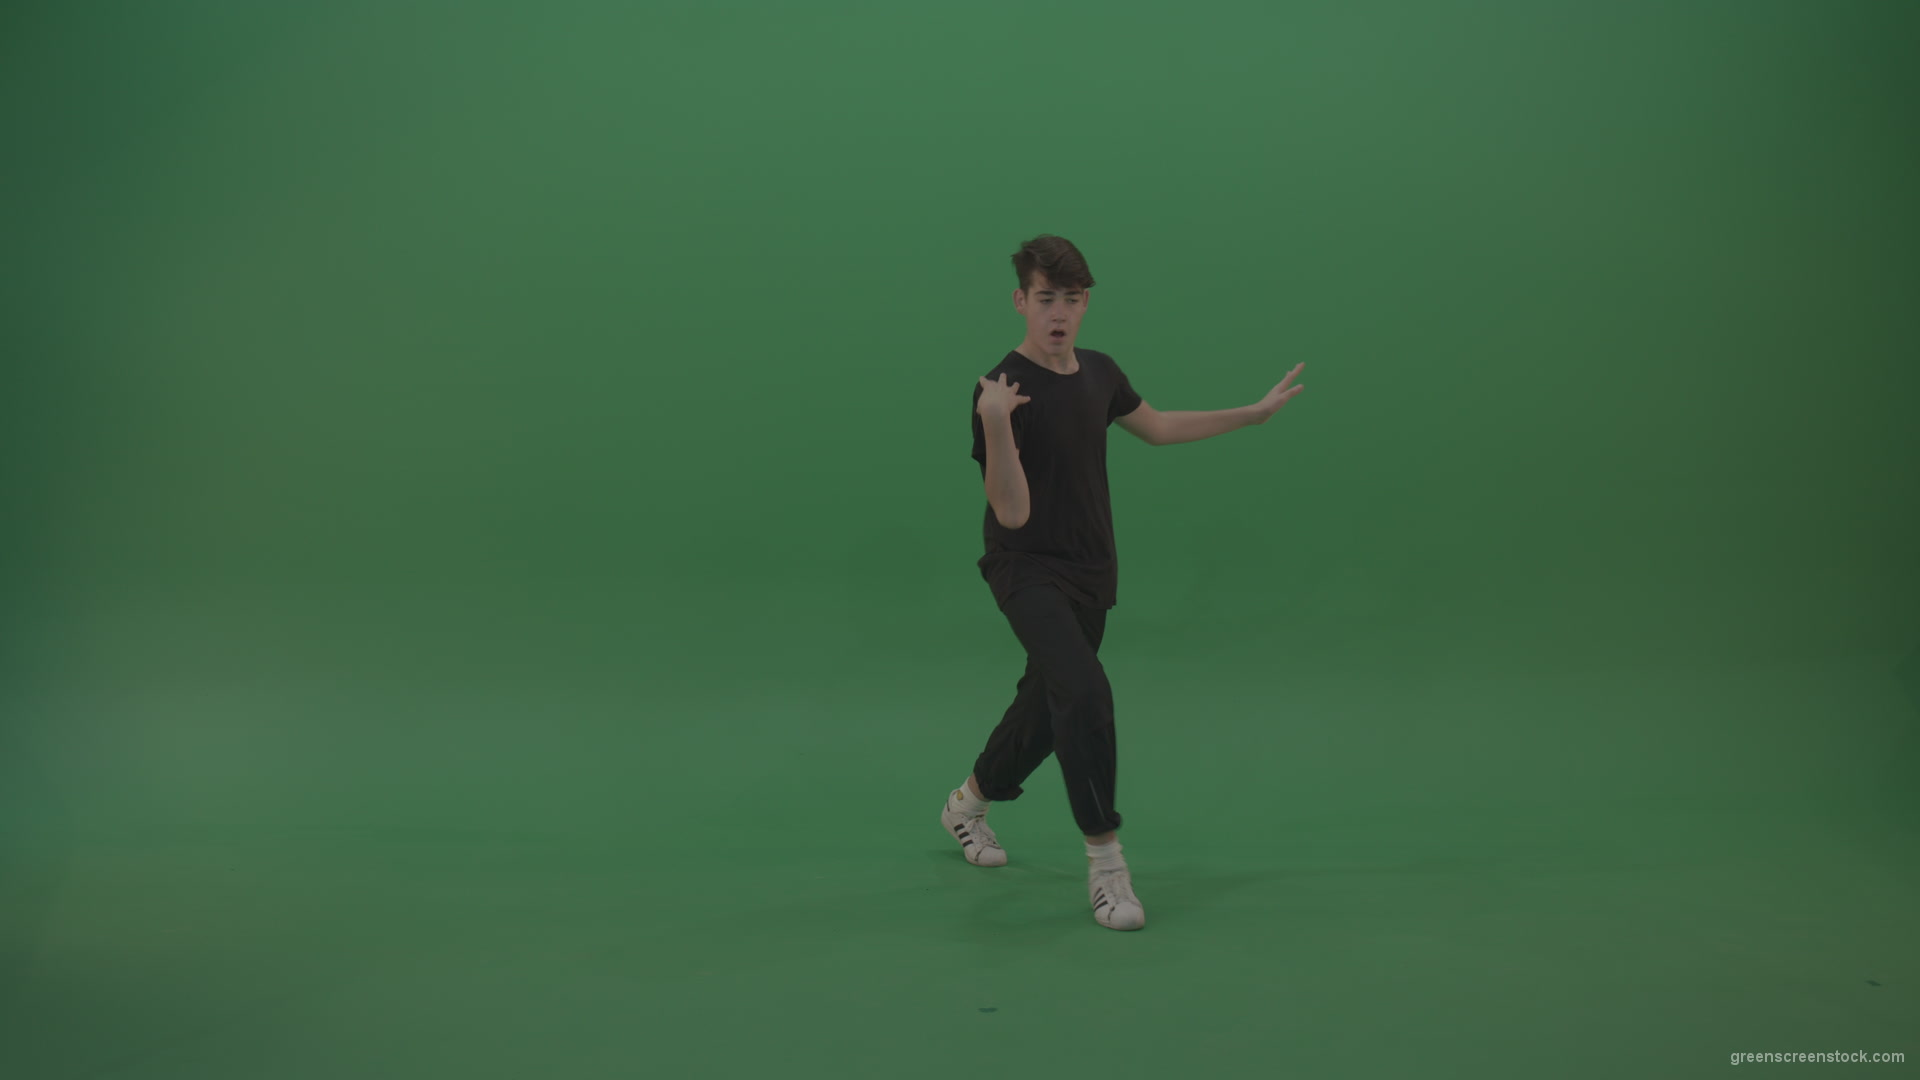 Young_Brunette_Boy_Showing_Awesome_Hip_Hop_Dance_Technical_Skills_With_Robot_Tought_Moves_On_Green_Screen_Chroma_Key_Background_005 Green Screen Stock